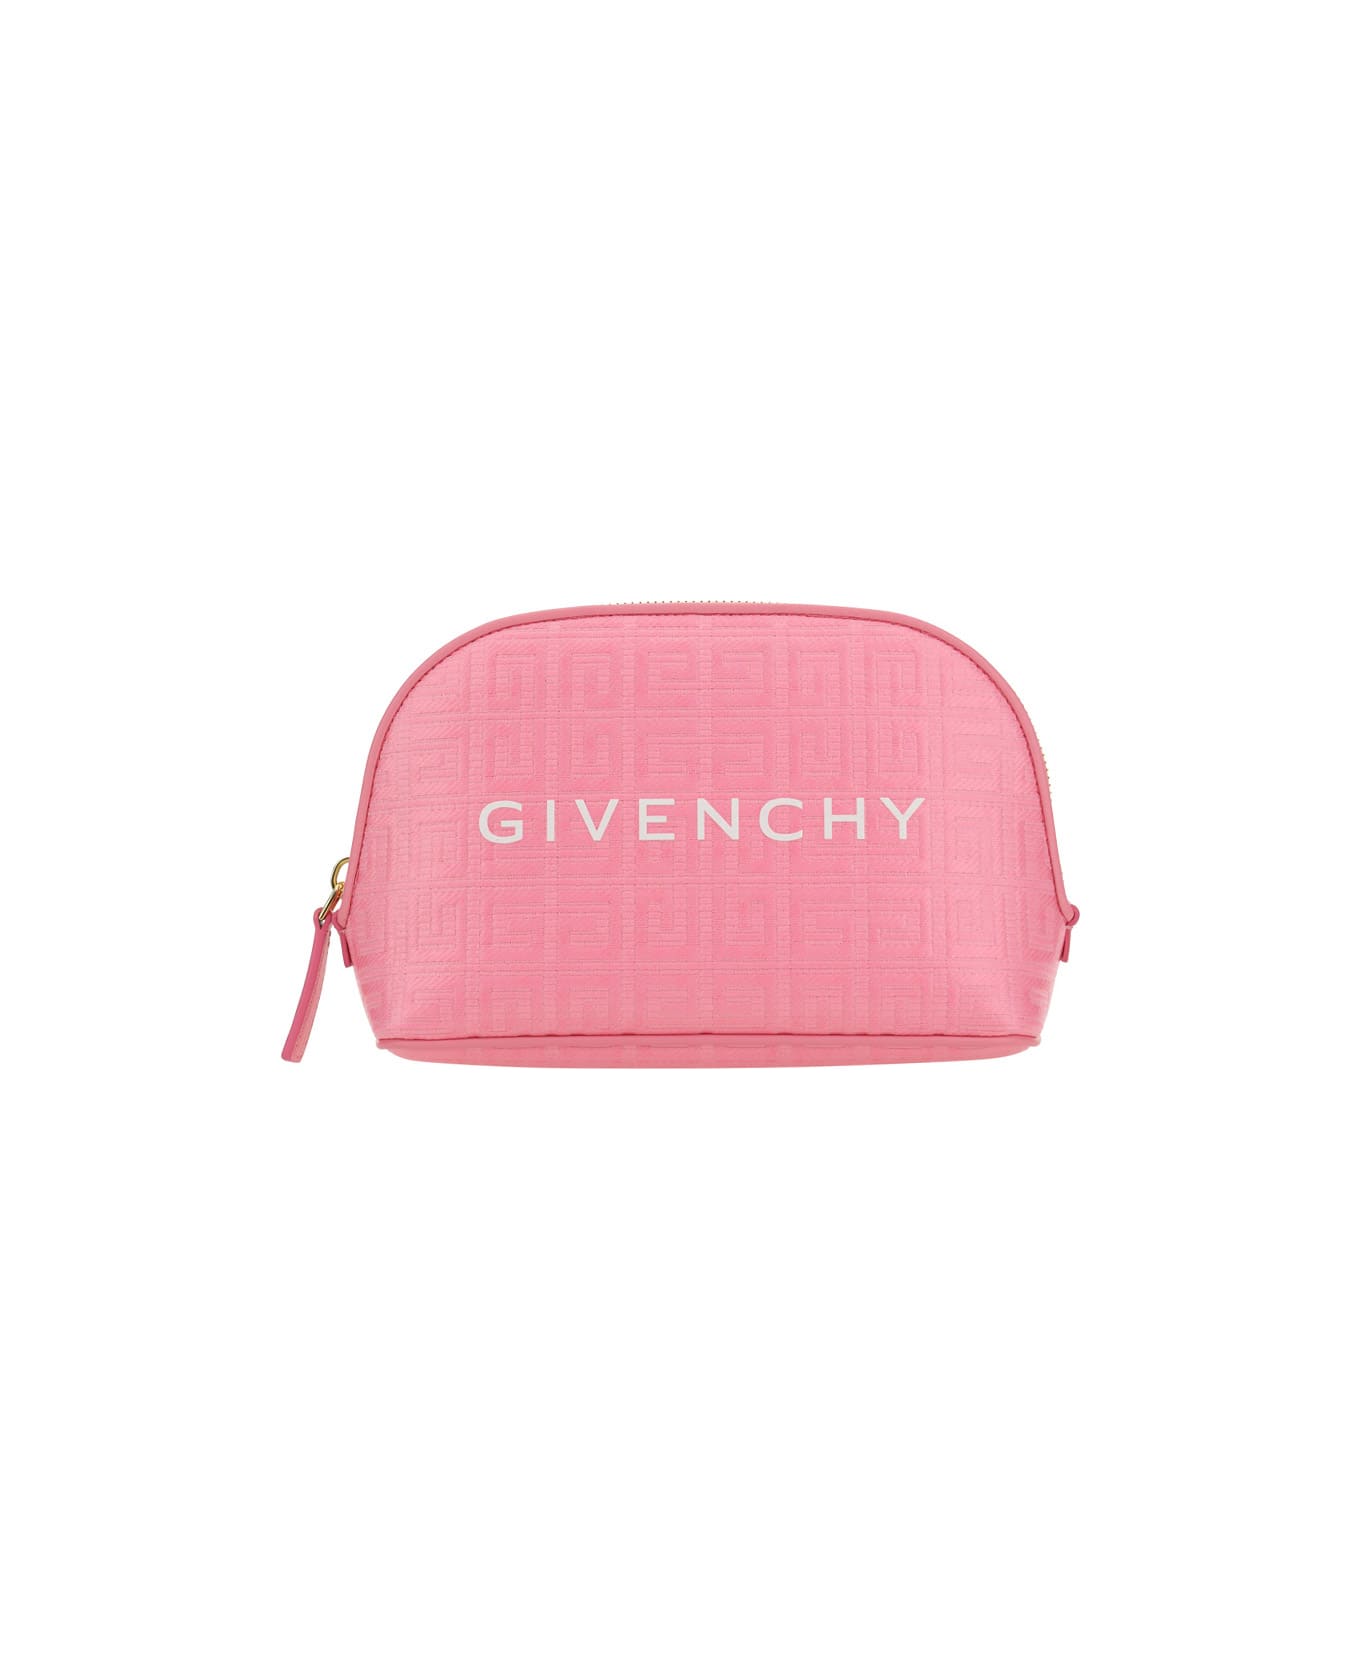 Givenchy G-essentials Pouch - Bright Pink